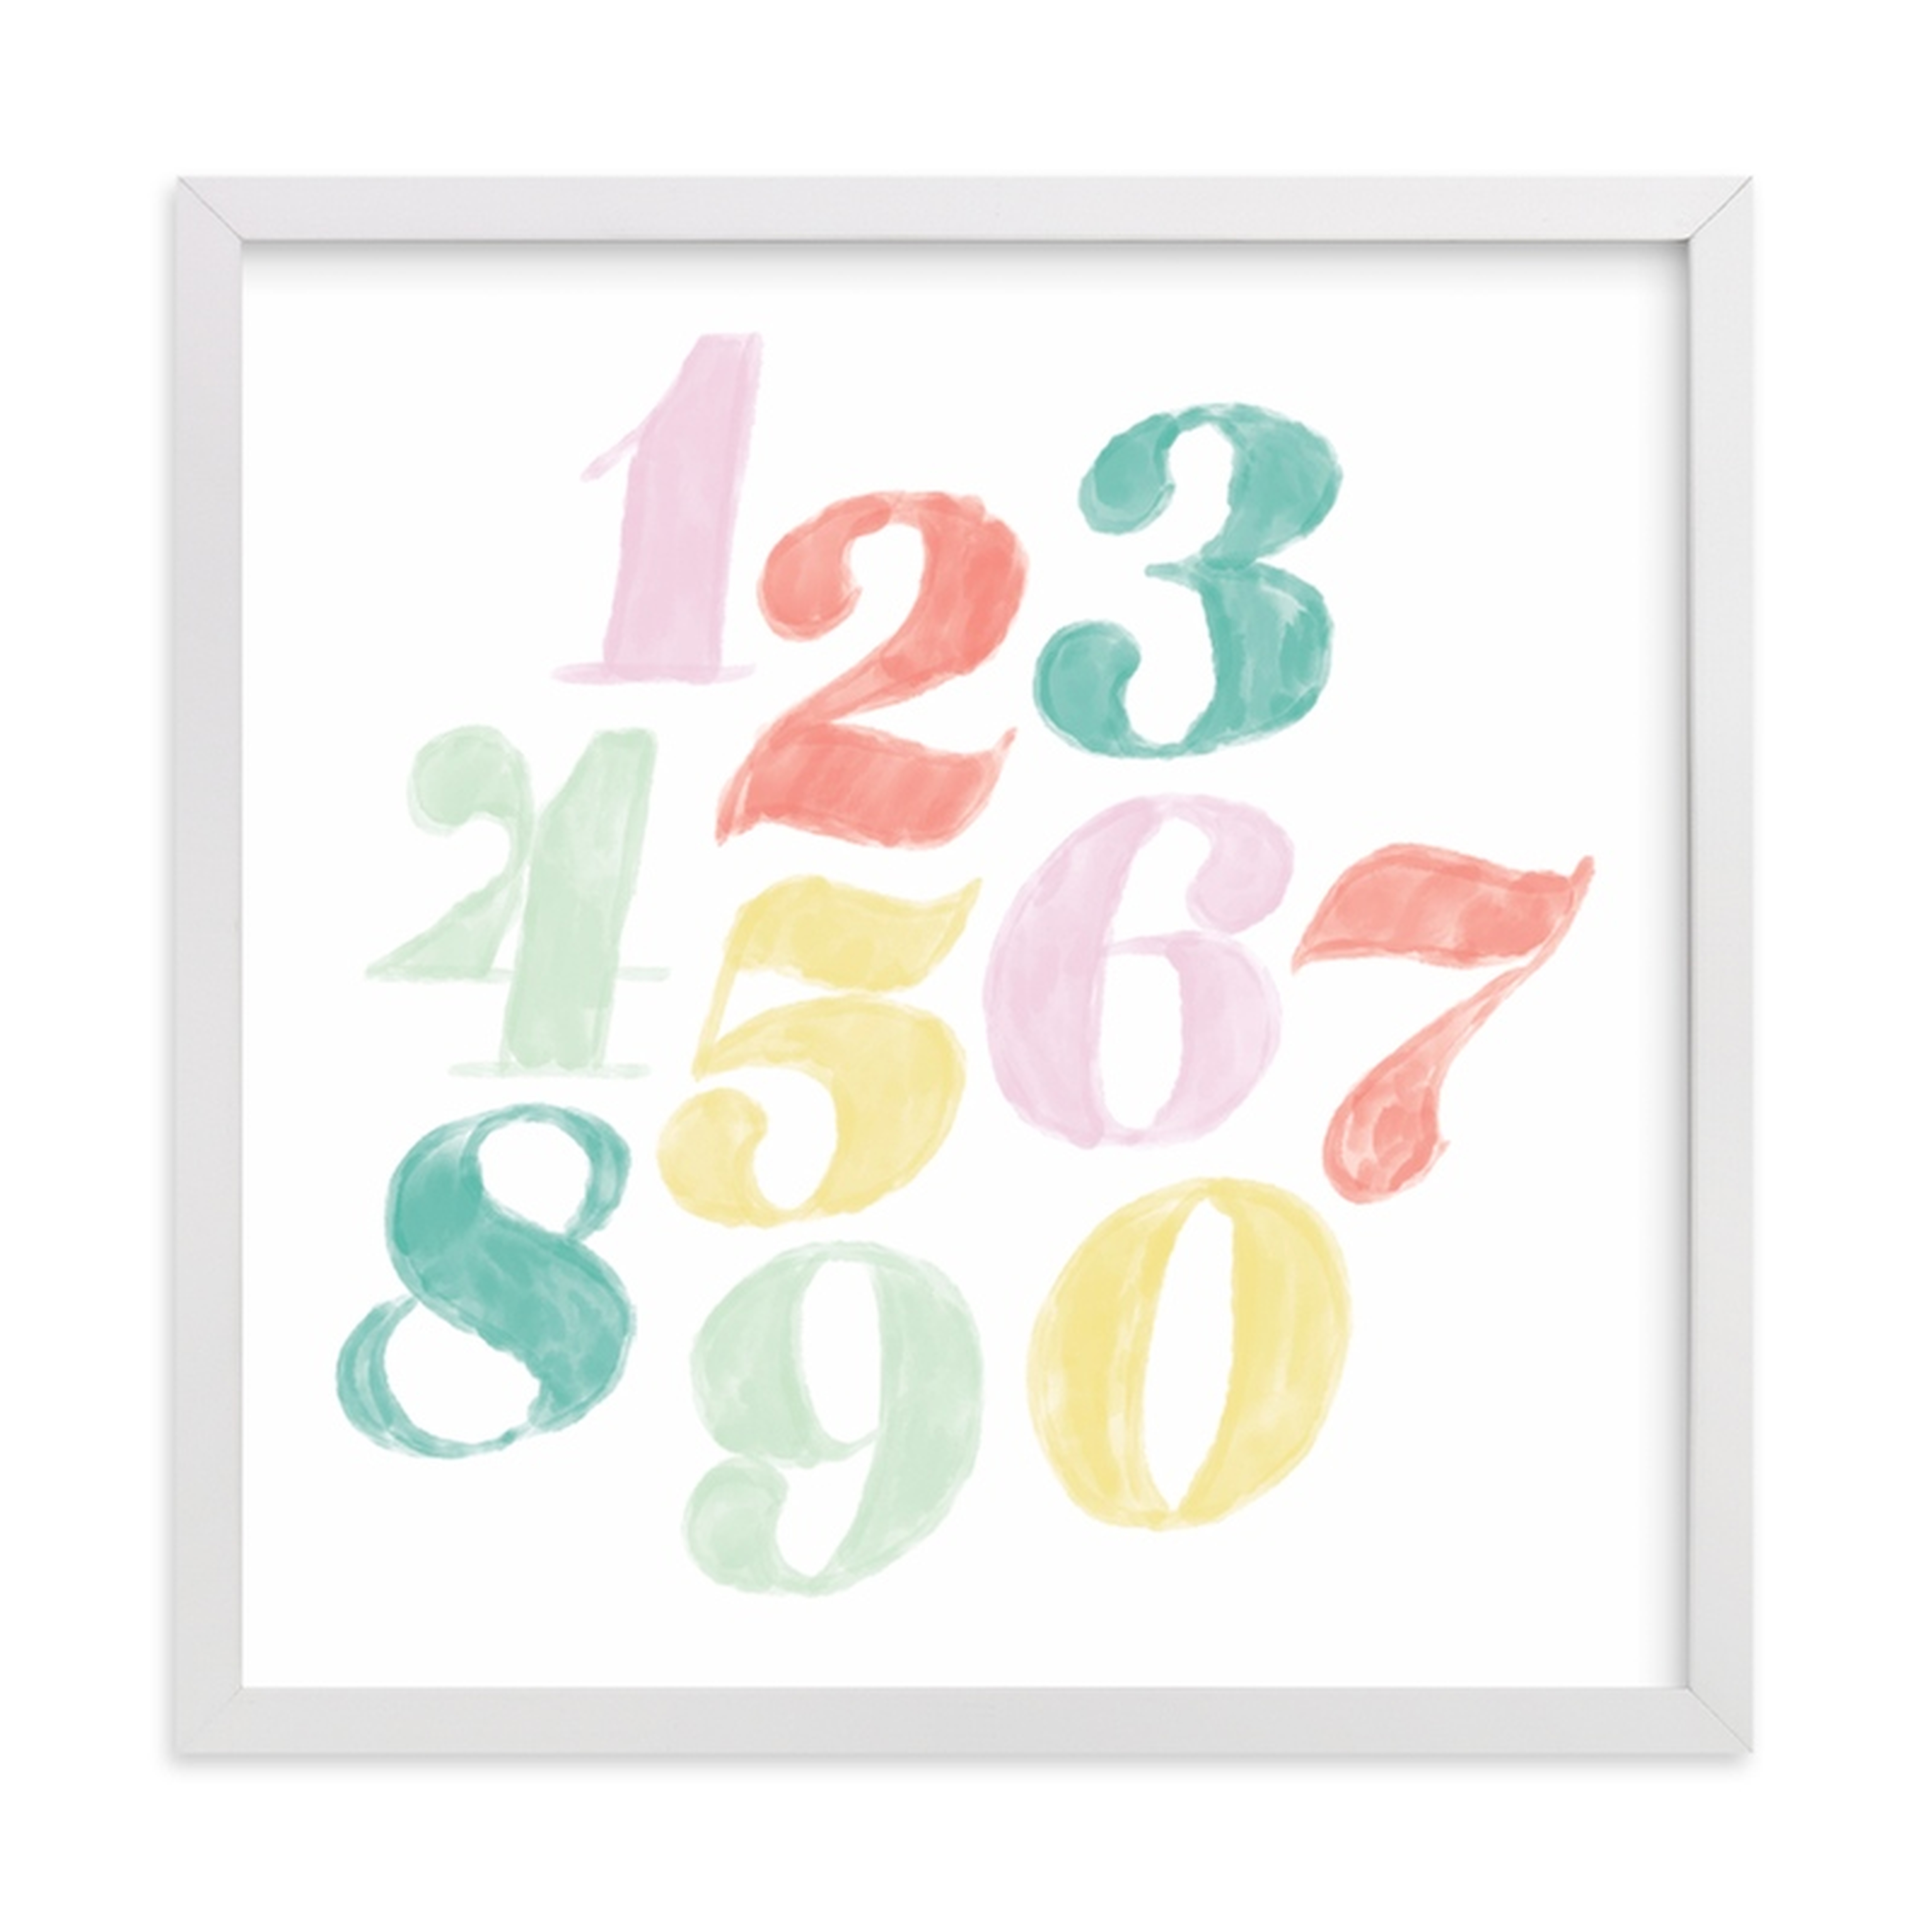 numerals - 11"x11" - classic white frame - Minted